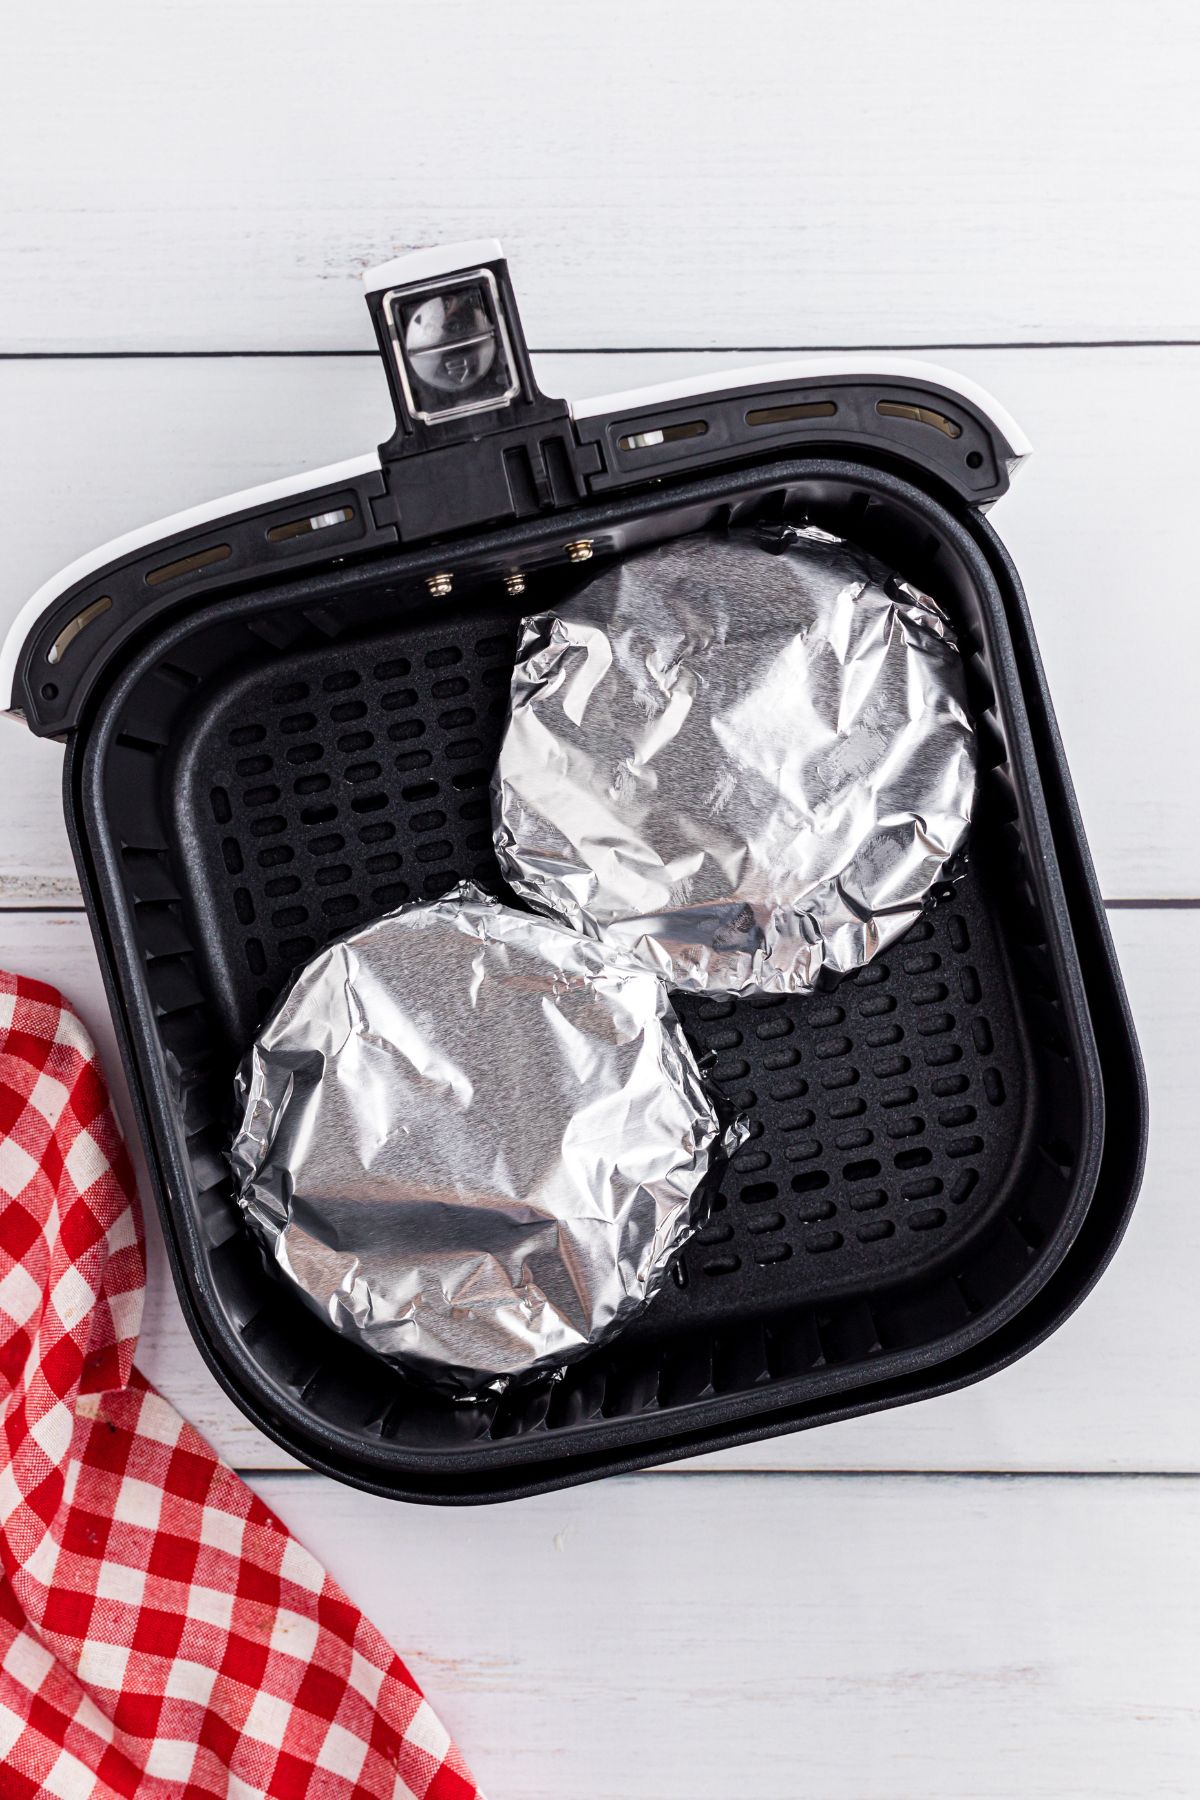 Pot pies covered in foil in an air fryer basket.